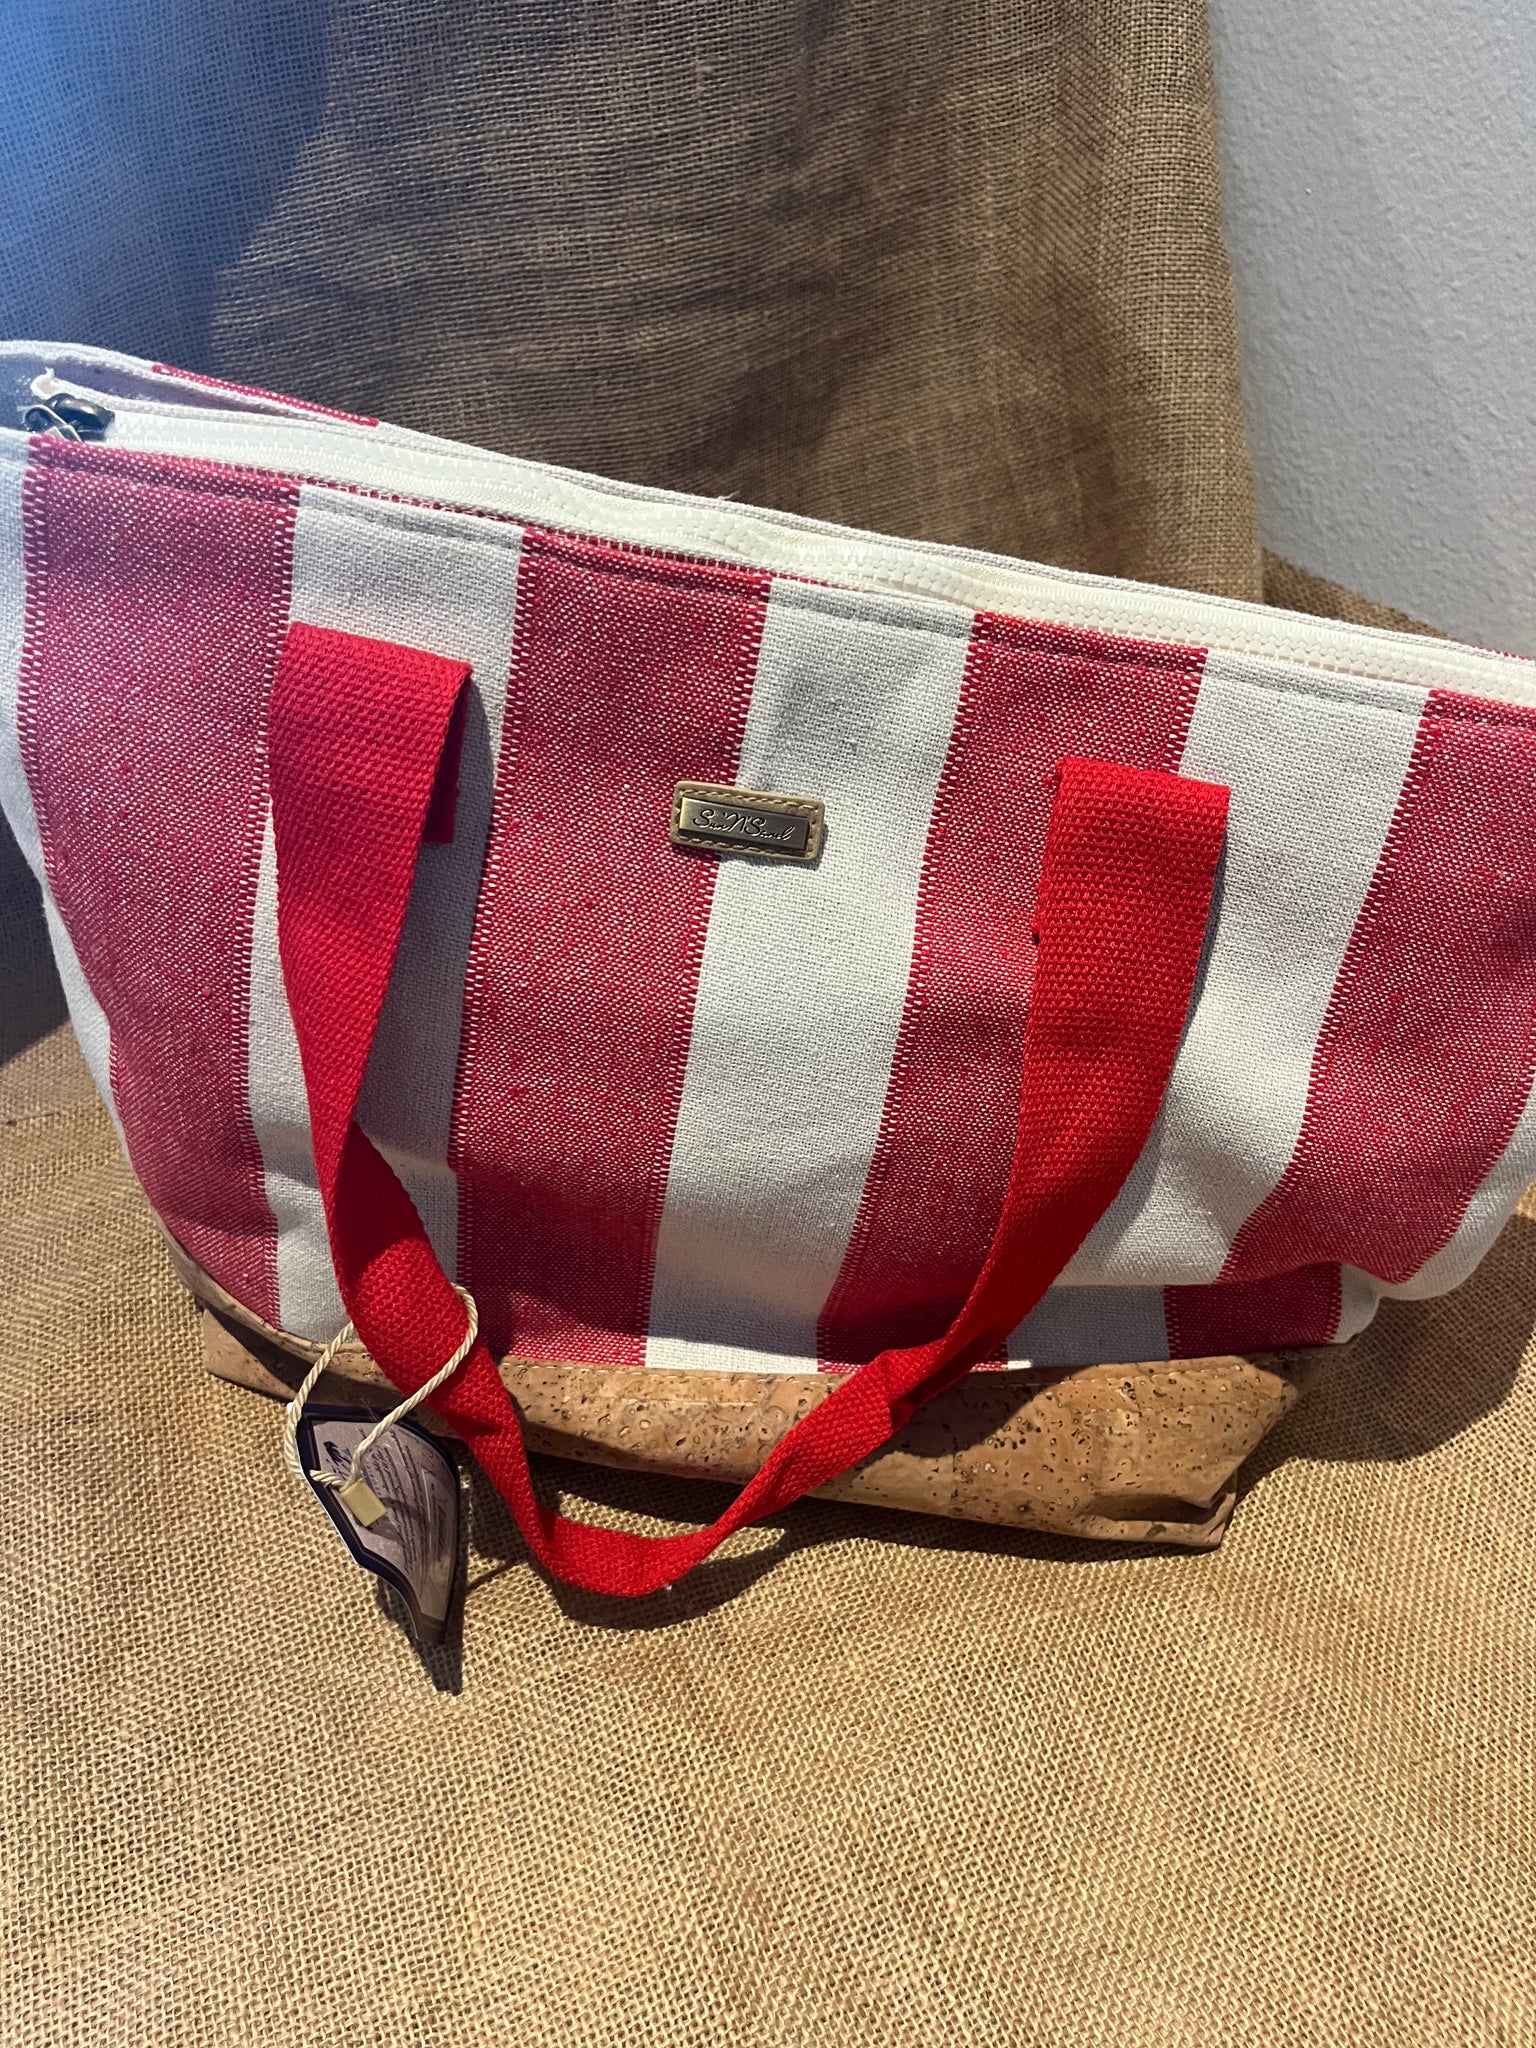 Red and Cream Striped Summer Beach Tote